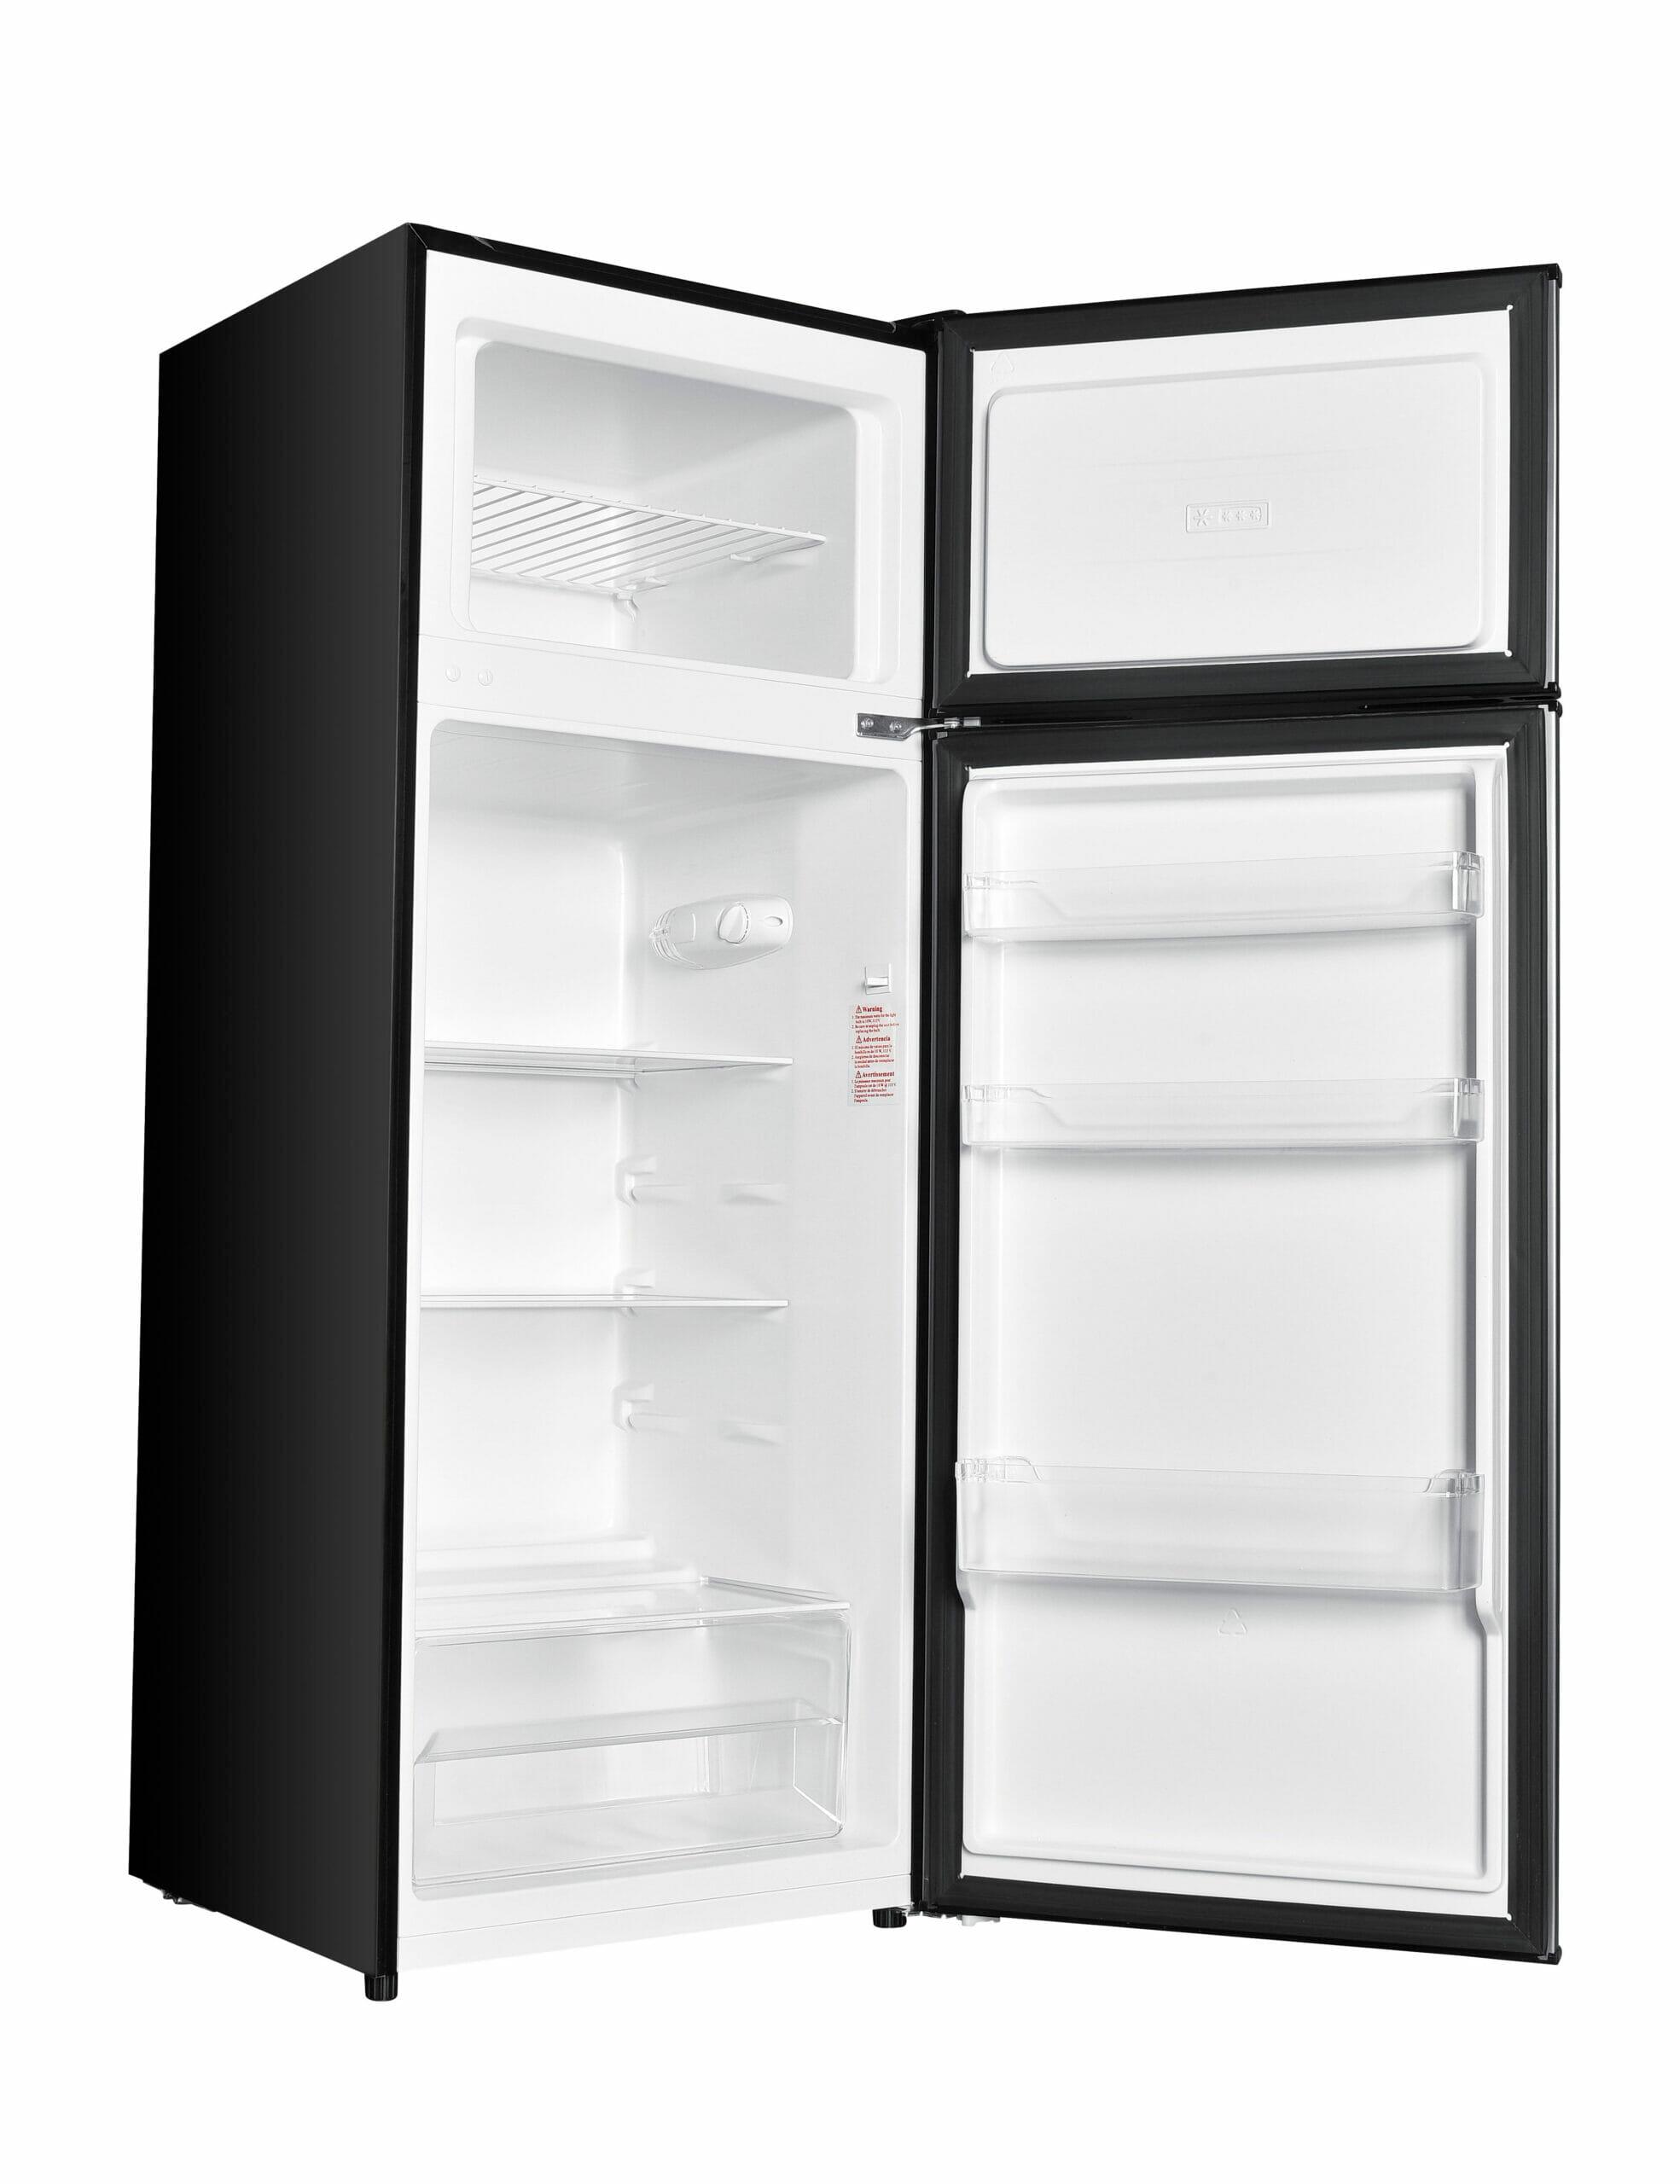 Danby 7.4 cu. ft. Apartment Size Top Mount Fridge in Stainless Steel